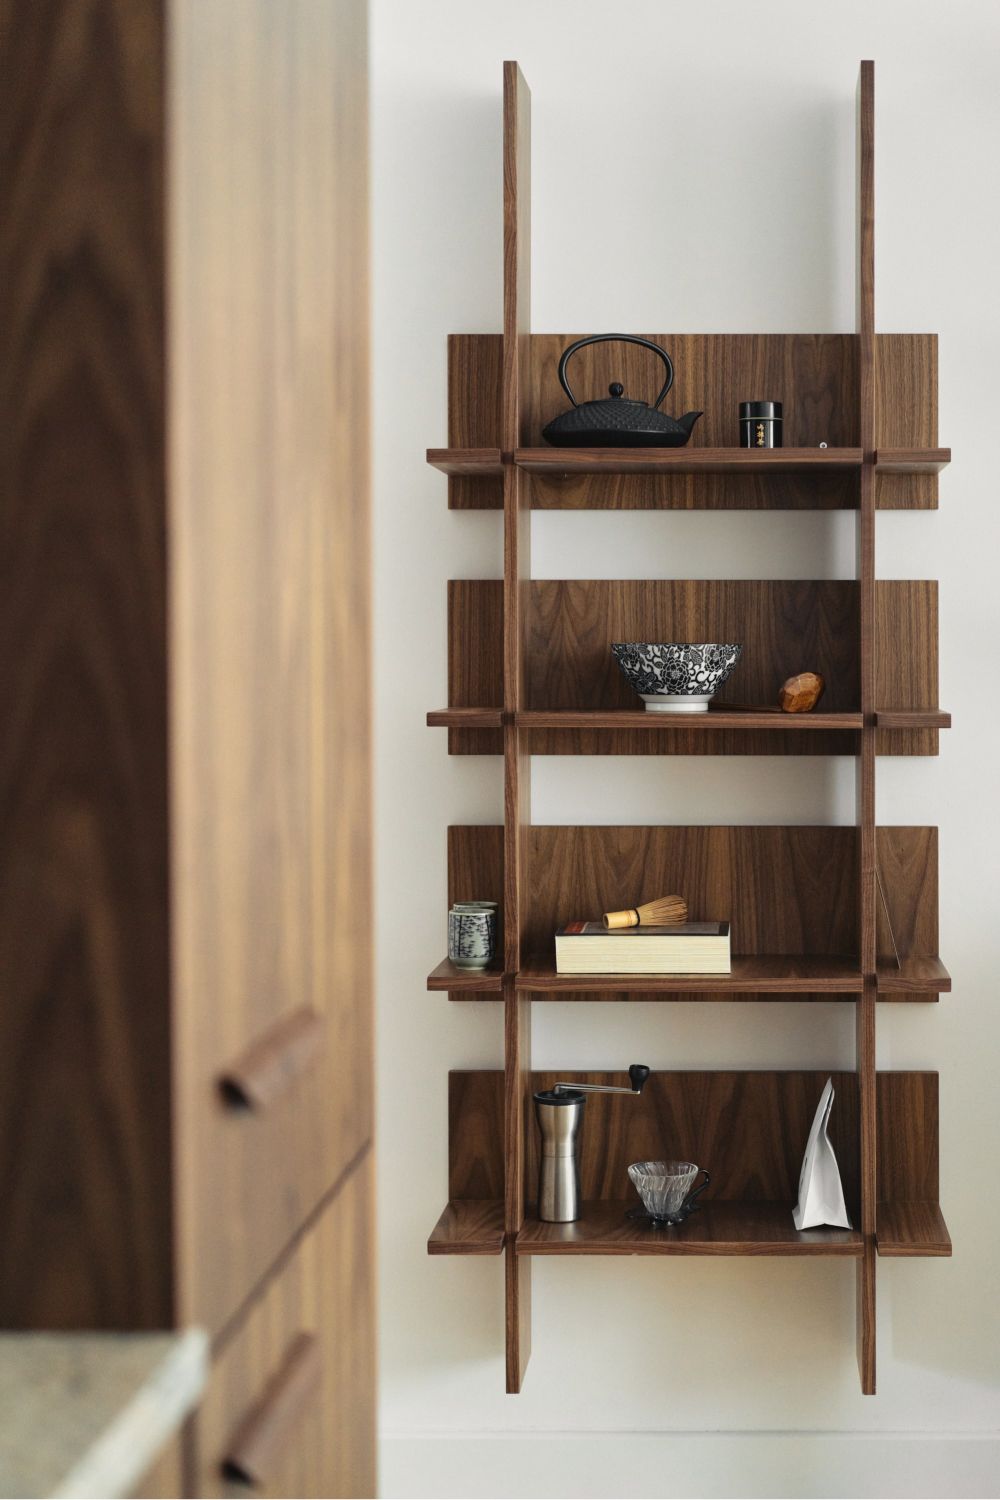 Functional and Stylish: Choosing the
Right Wall Shelf for Your Home